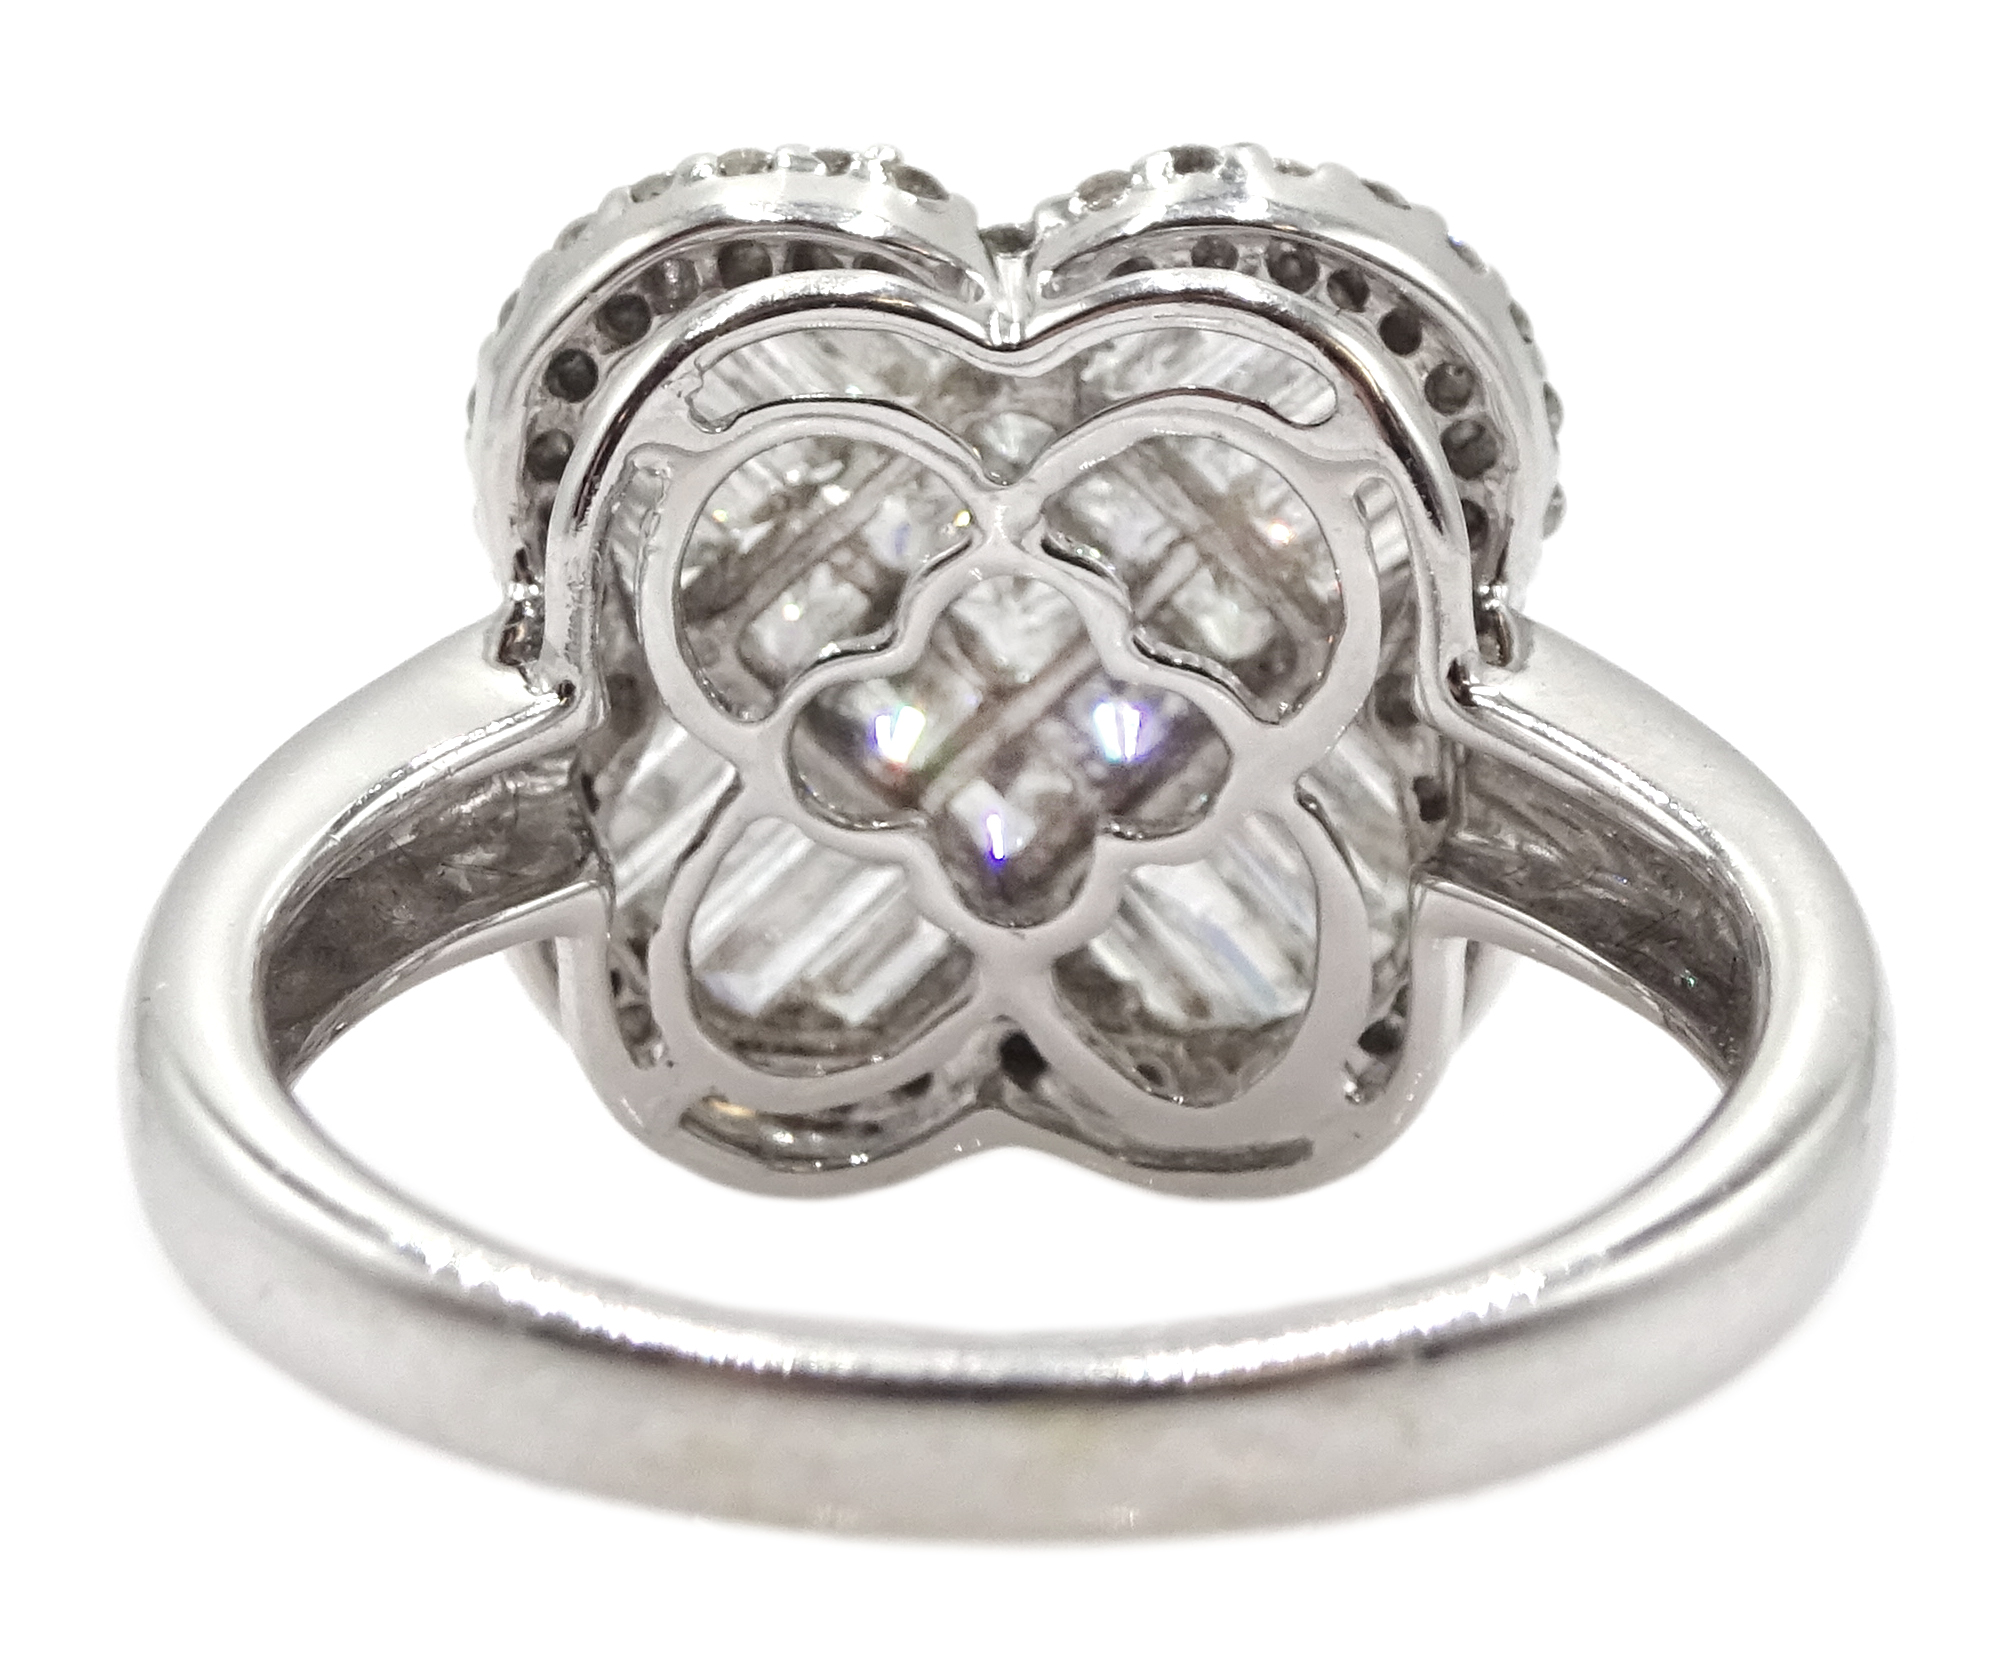 18ct white gold and diamond cluster ring, diamond total weight approx 1.25 carat - Image 6 of 6